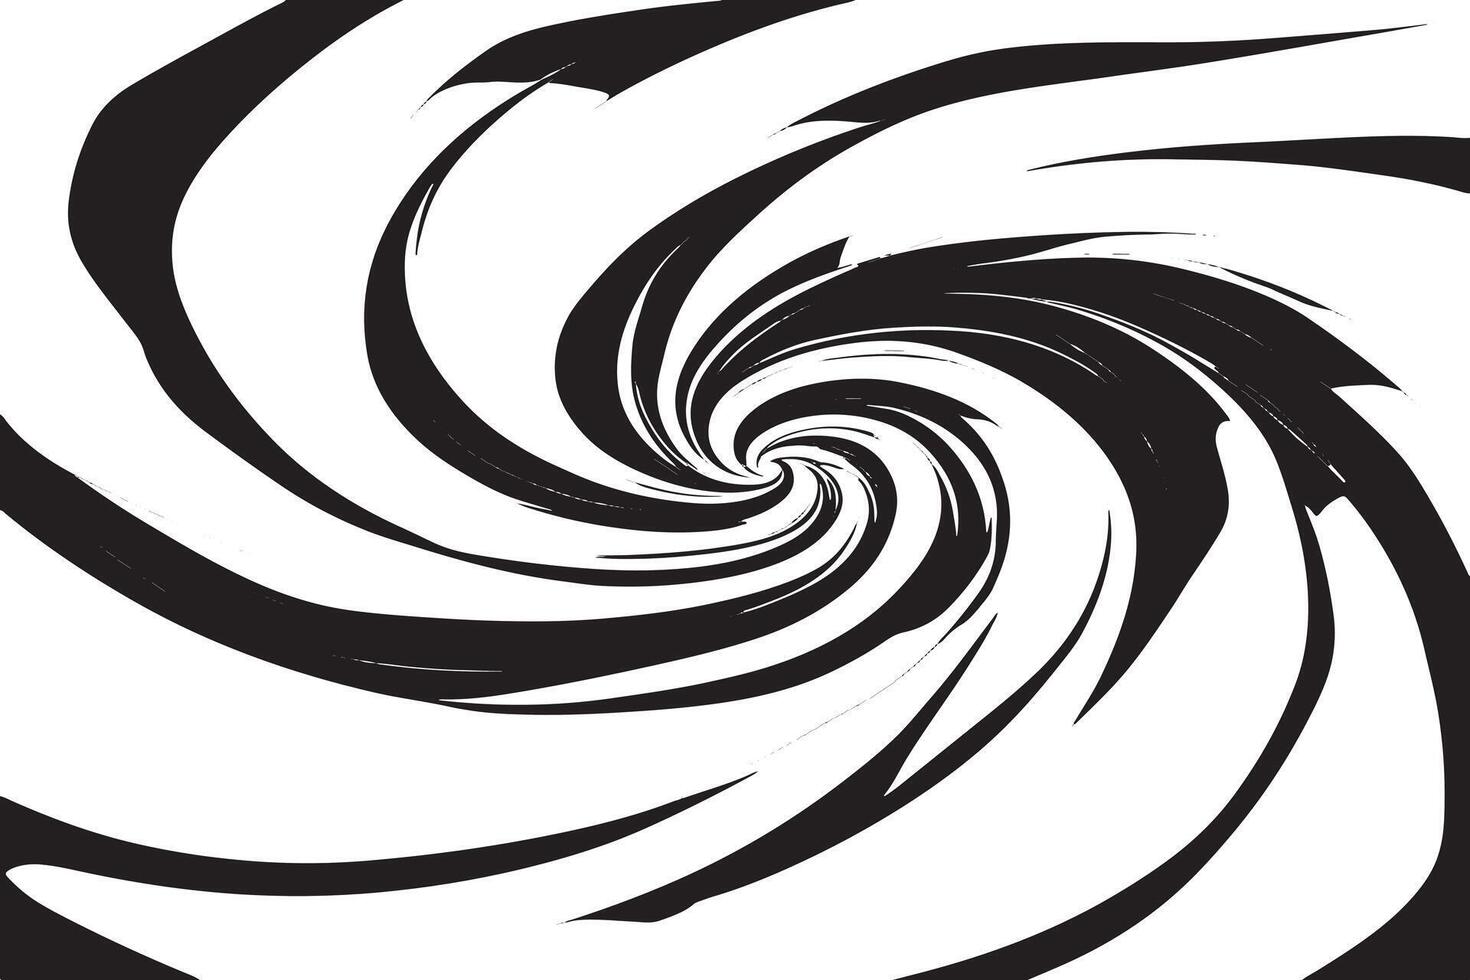 Dynamic Monochrome Captivating Counter-Clockwise Archimedean Spiral Unfolding on Snow White Canvas vector